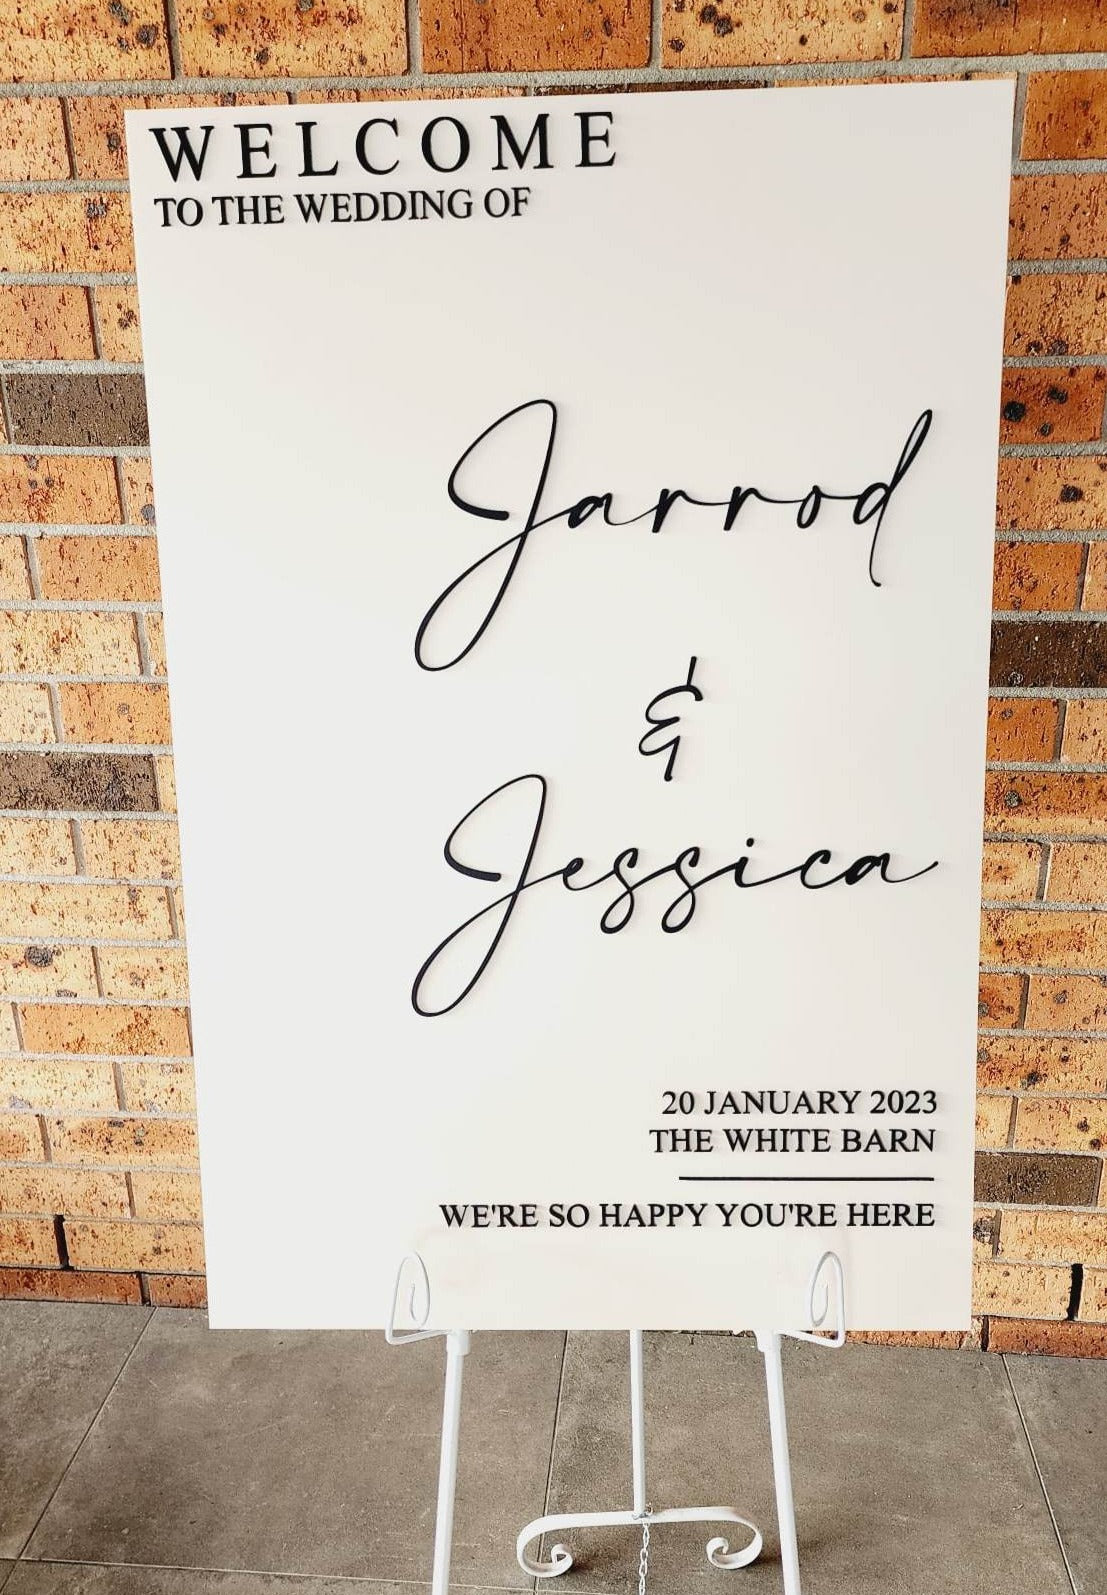 Wedding,wedding seating list,custom laser cut wedding,wedding seating list,,laser cut gift,wedding present, lily and co creations